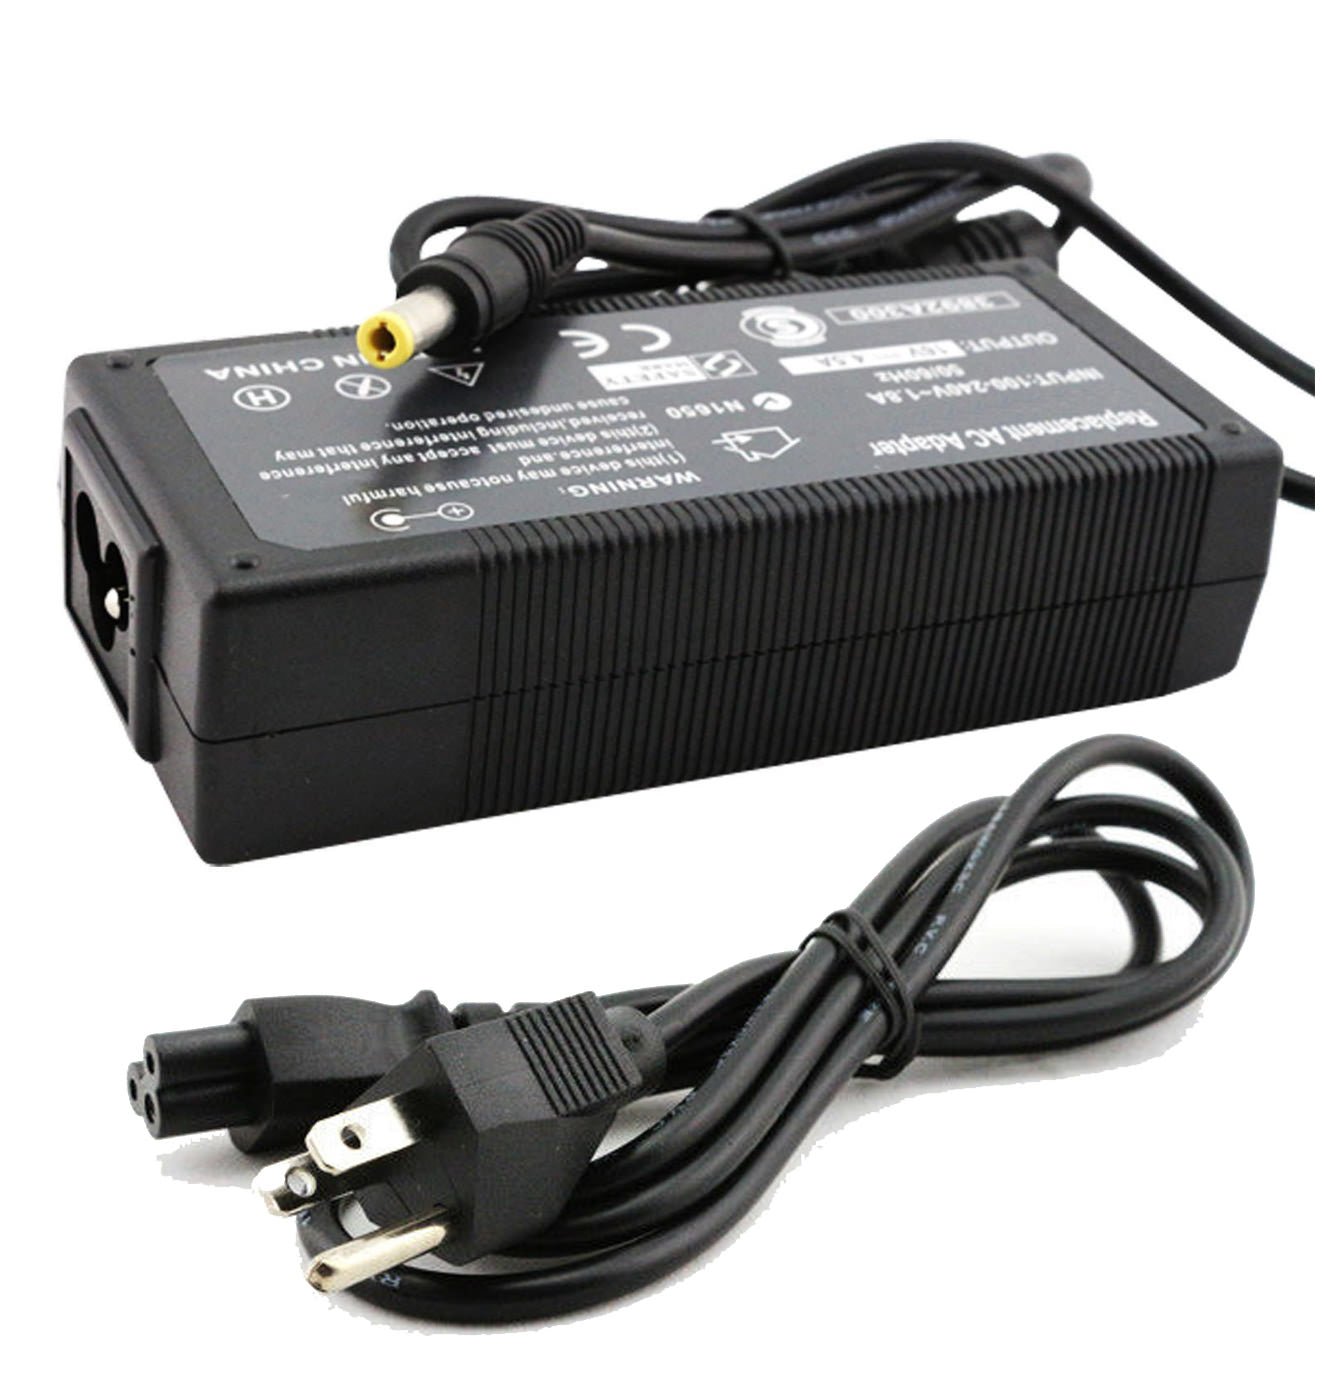 AC Adapter Charger for IBM ThinkPad T22 Notebook.